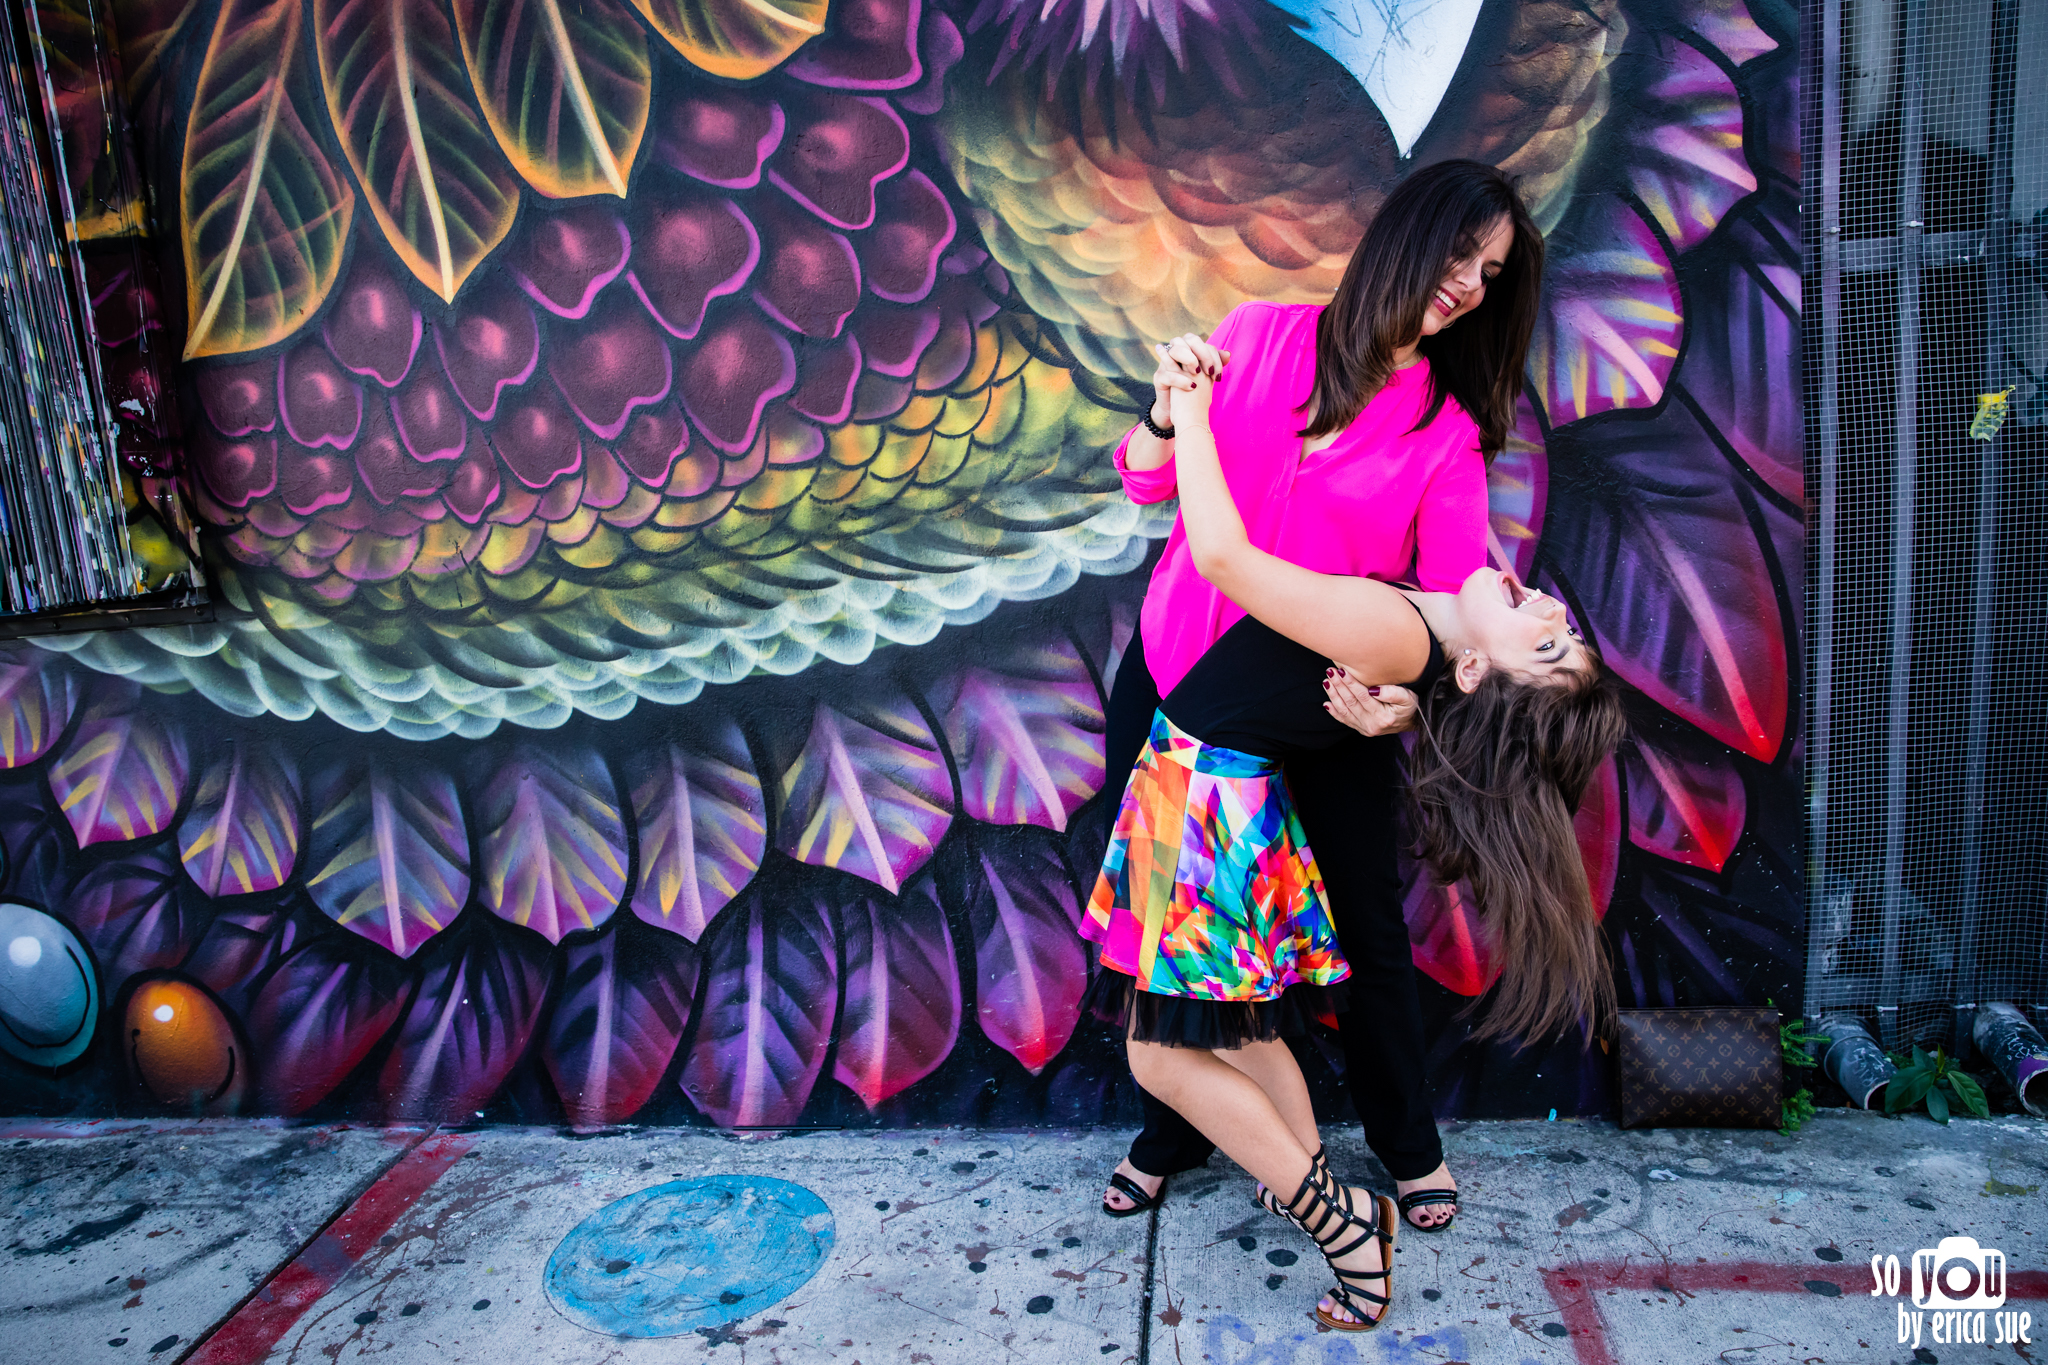 so-you-by-erica-sue-family-photographer-miami-fl-wynwood-mother-daughter-3510.jpg